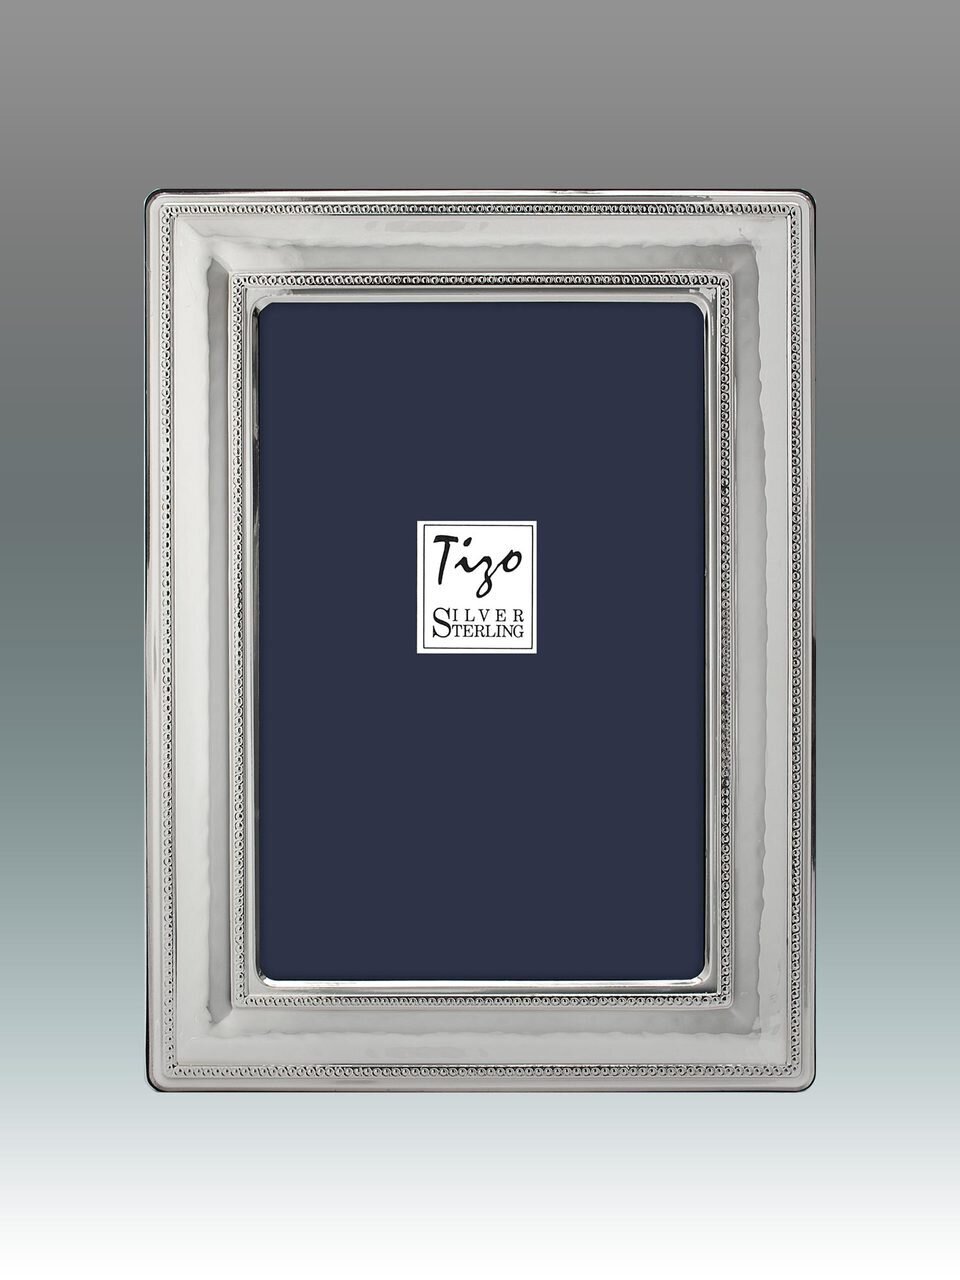 Tizo Pretty Beads 5 x 7 Inch Sterling Silver Picture Frame